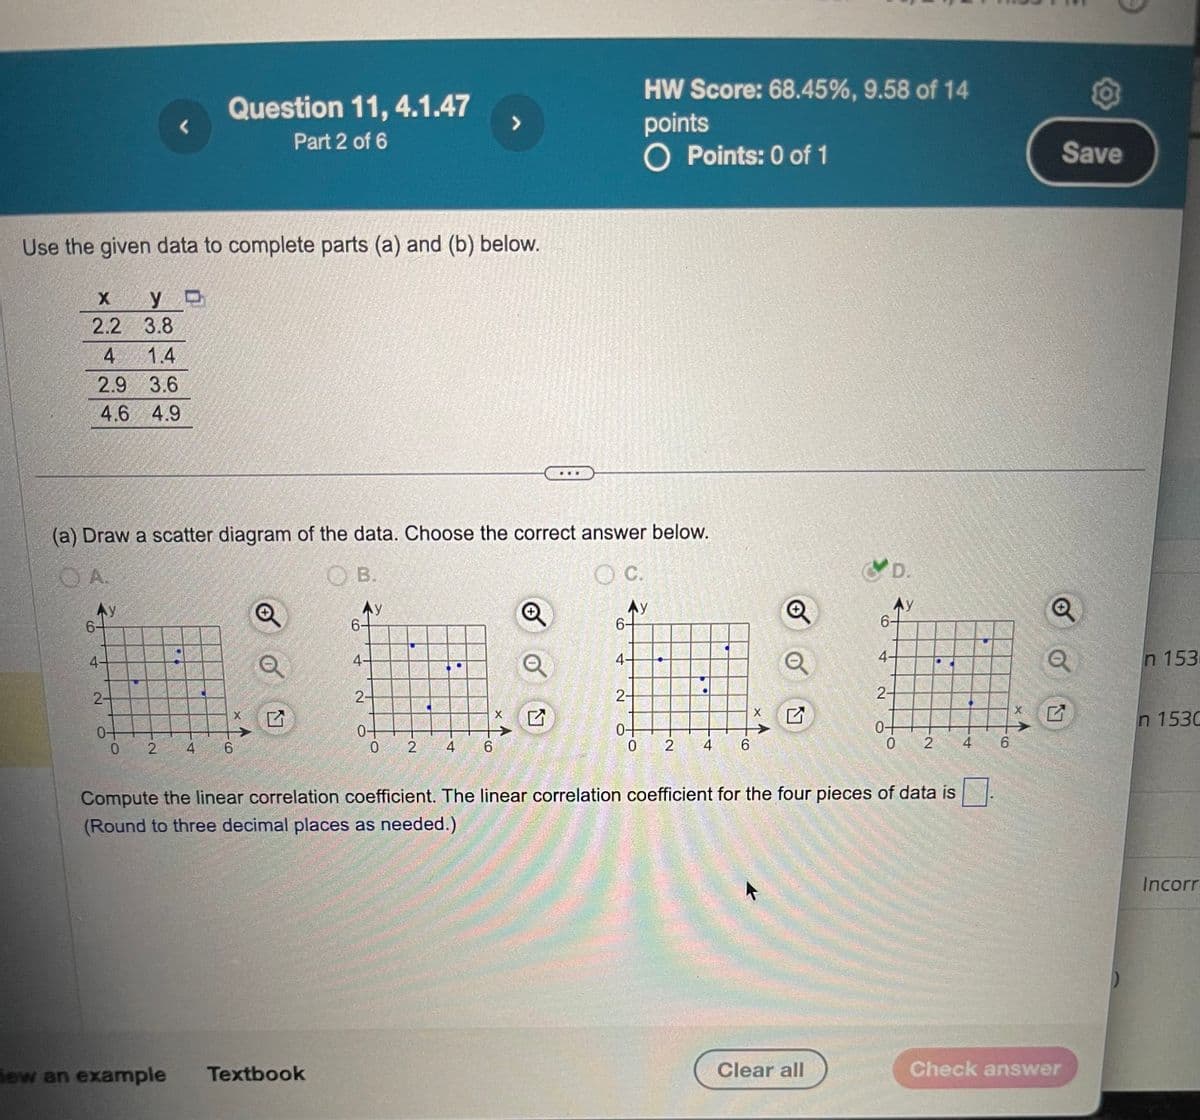 L
Question 11, 4.1.47
Part 2 of 6
>
Use the given data to complete parts (a) and (b) below.
HW Score: 68.45%, 9.58 of 14
points
O Points: 0 of 1
x
y
2.2
3.8
4
1.4
2.9 3.6
4.6 4.9
(a) Draw a scatter diagram of the data. Choose the correct answer below.
OA.
B.
6
Ay
4-
2-
0-
2
4
6
4-
2-
×
0-
0
2
4
6
OC.
Ay
6-
4-
2-
X
✓
0+
0
2
4
6
D.
Ay
4.
2-
0-
0 2
4
Compute the linear correlation coefficient. The linear correlation coefficient for the four pieces of data is
(Round to three decimal places as needed.)
Save
n 153
n 1530
CO
6
new an example
Textbook
Clear all
Check answer
Incorr